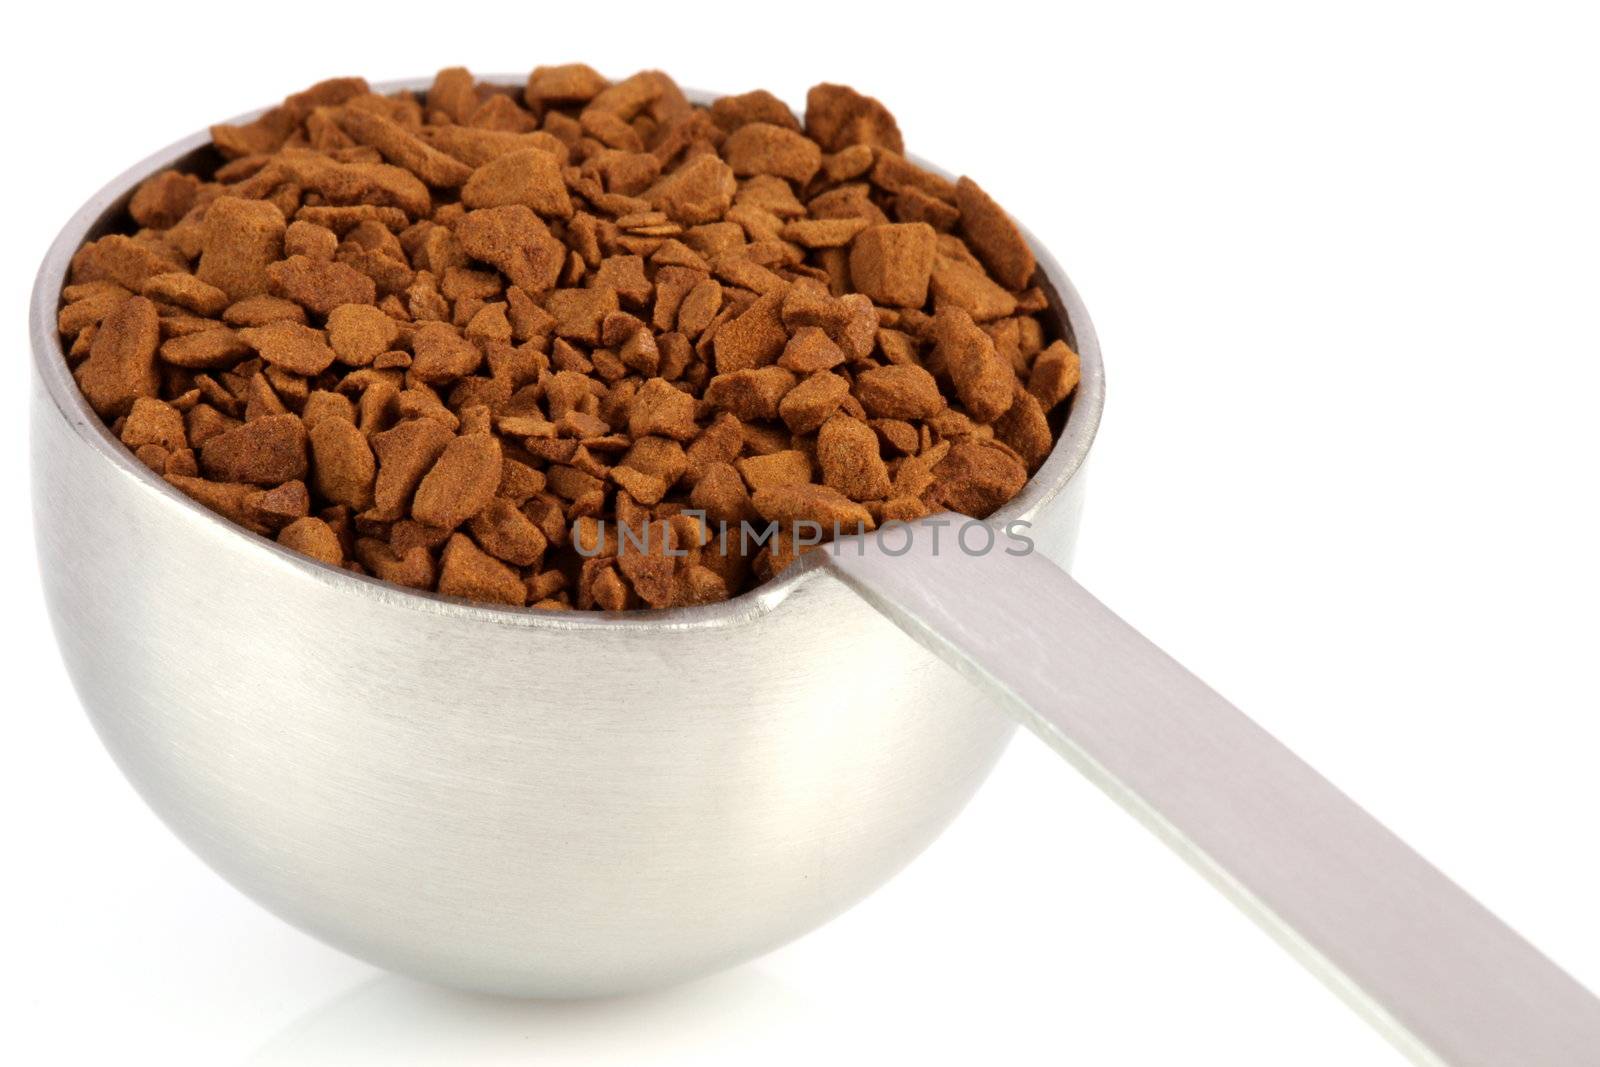 fresh instant gourmet coffee scoop isolated against white background